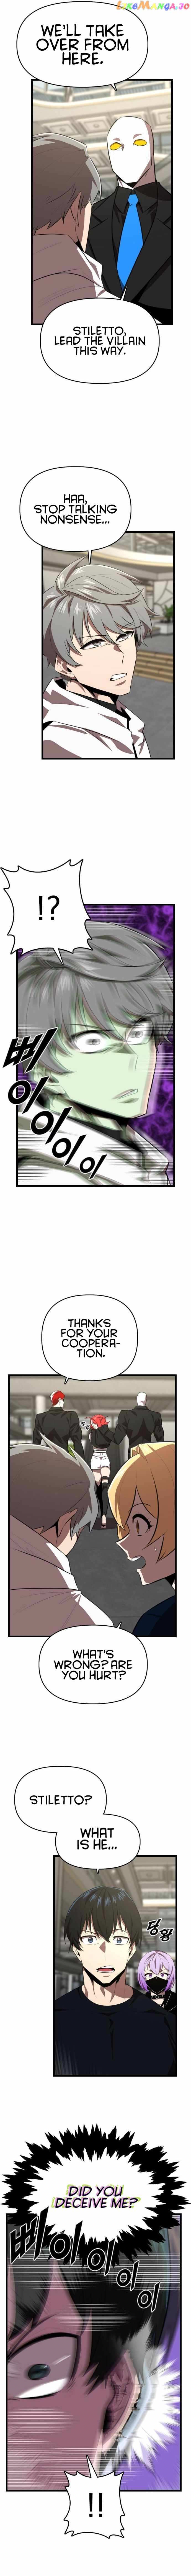 Rental Hero Chapter 30 - page 6